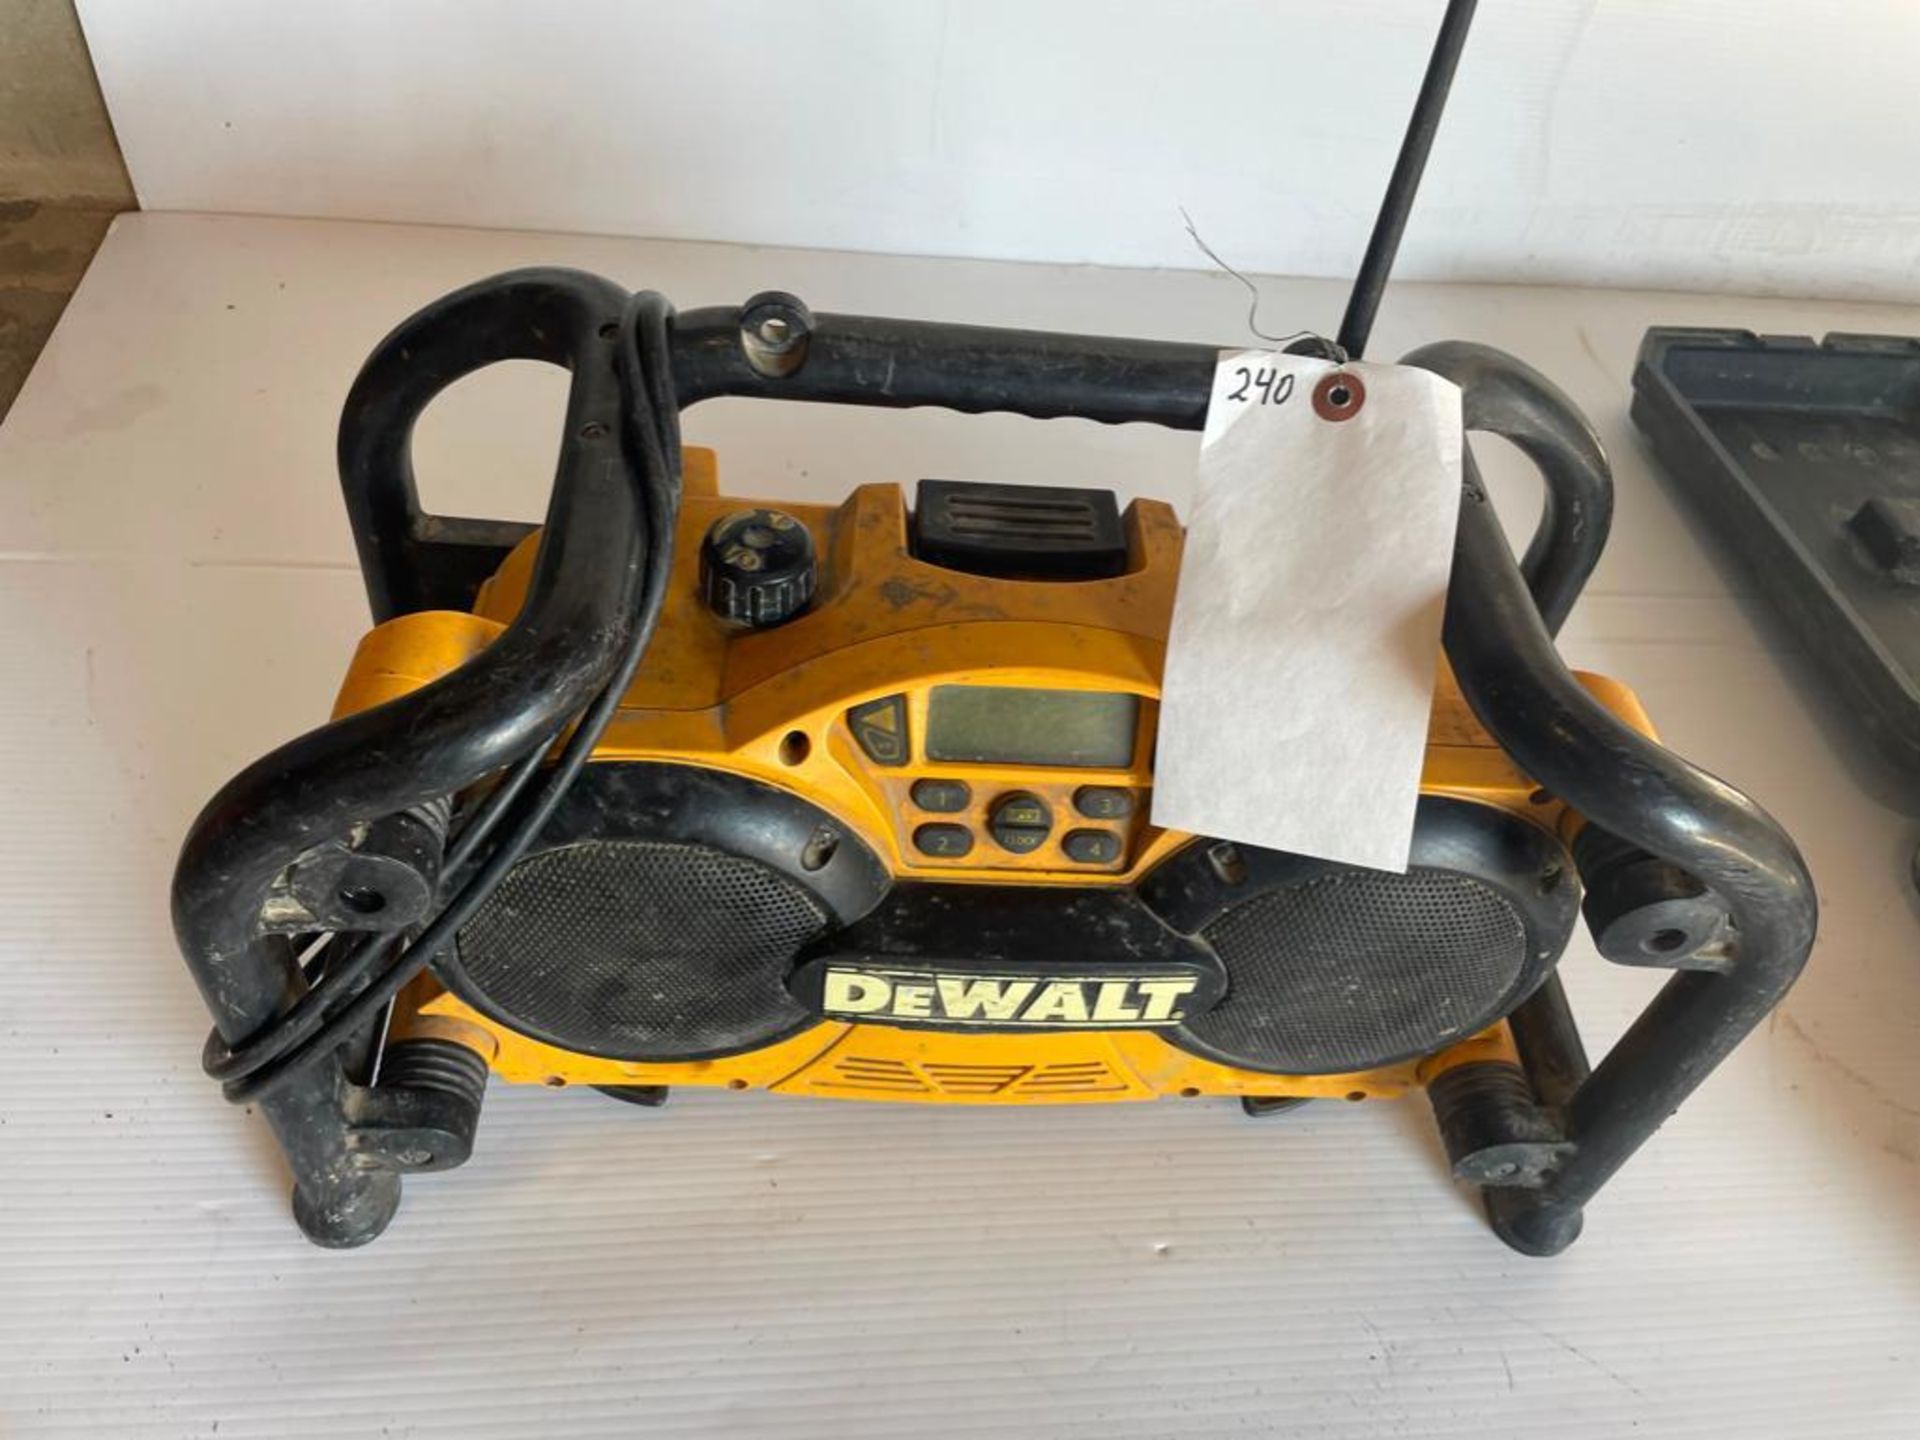 DeWalt DC011 Work Site Radio/Charger. Located in Hazelwood, MO - Image 2 of 3